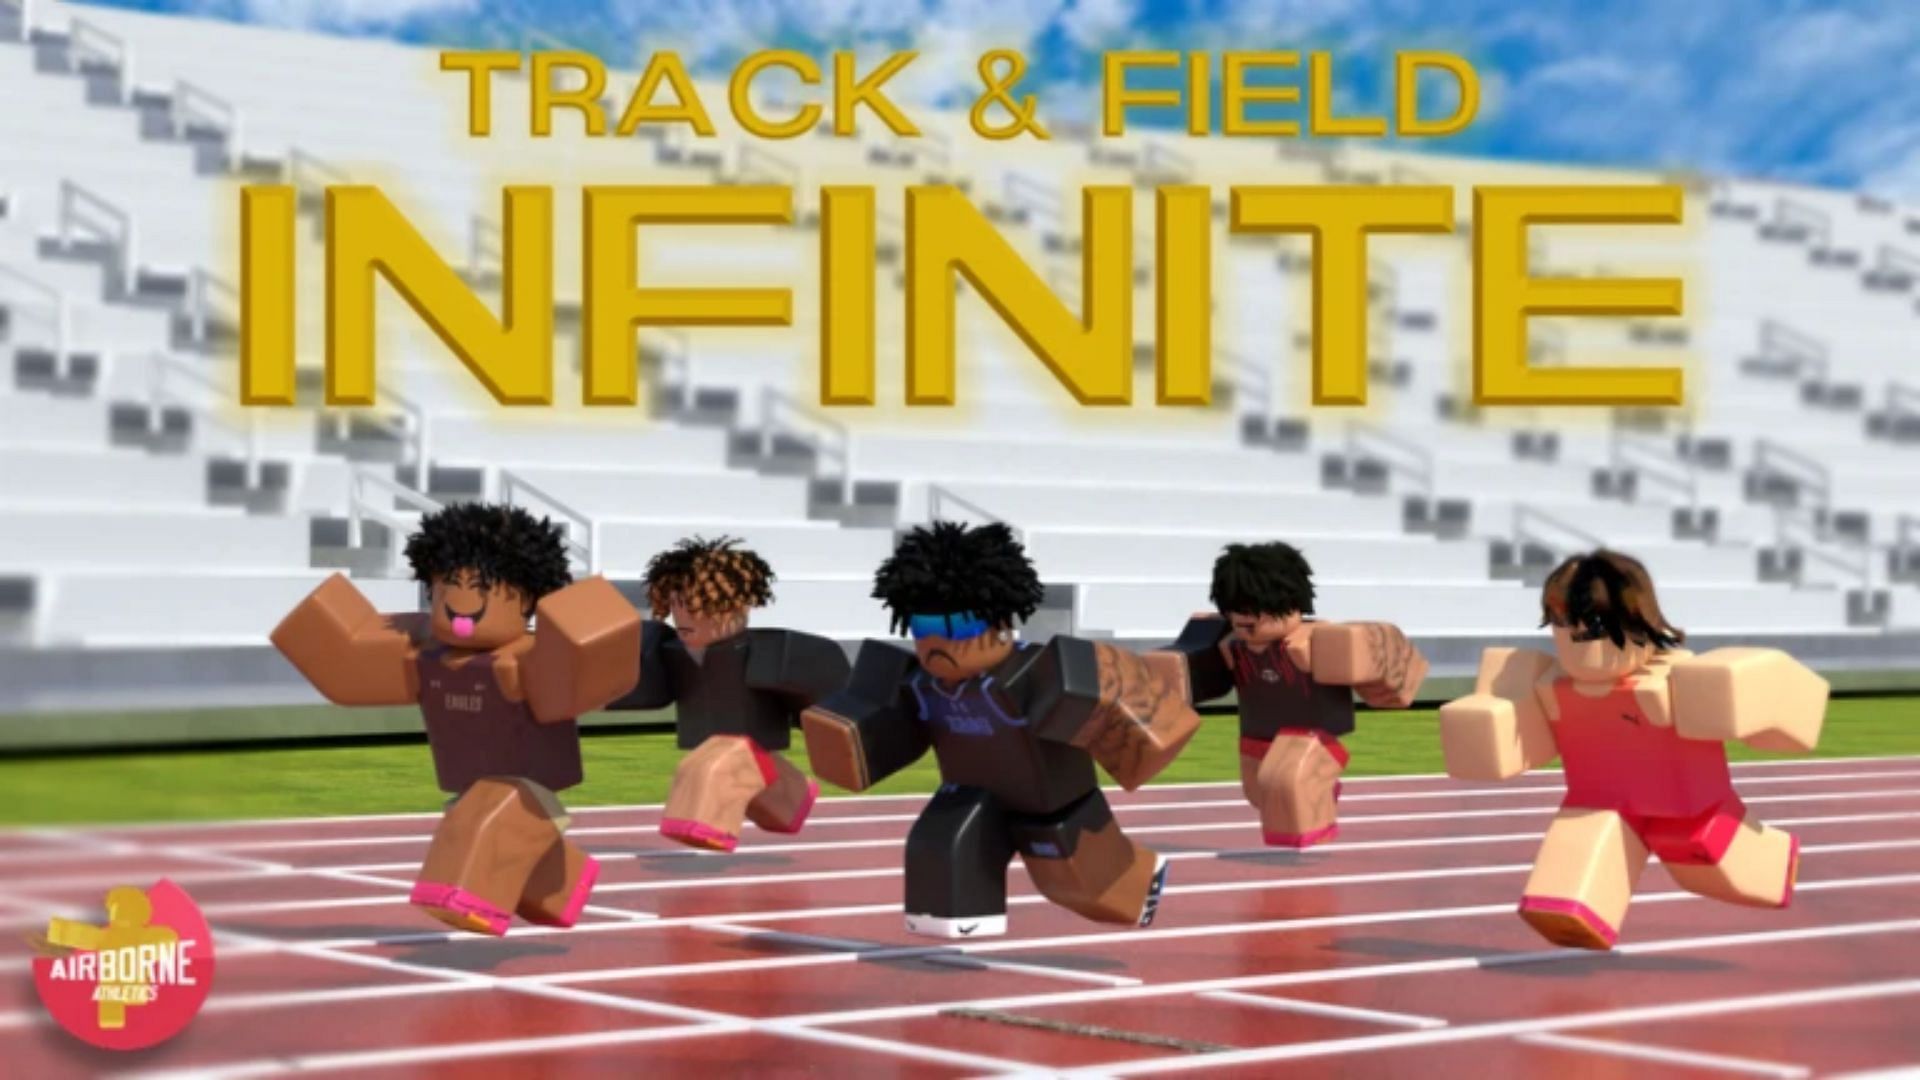 Official cover art for the game (Image via Roblox)